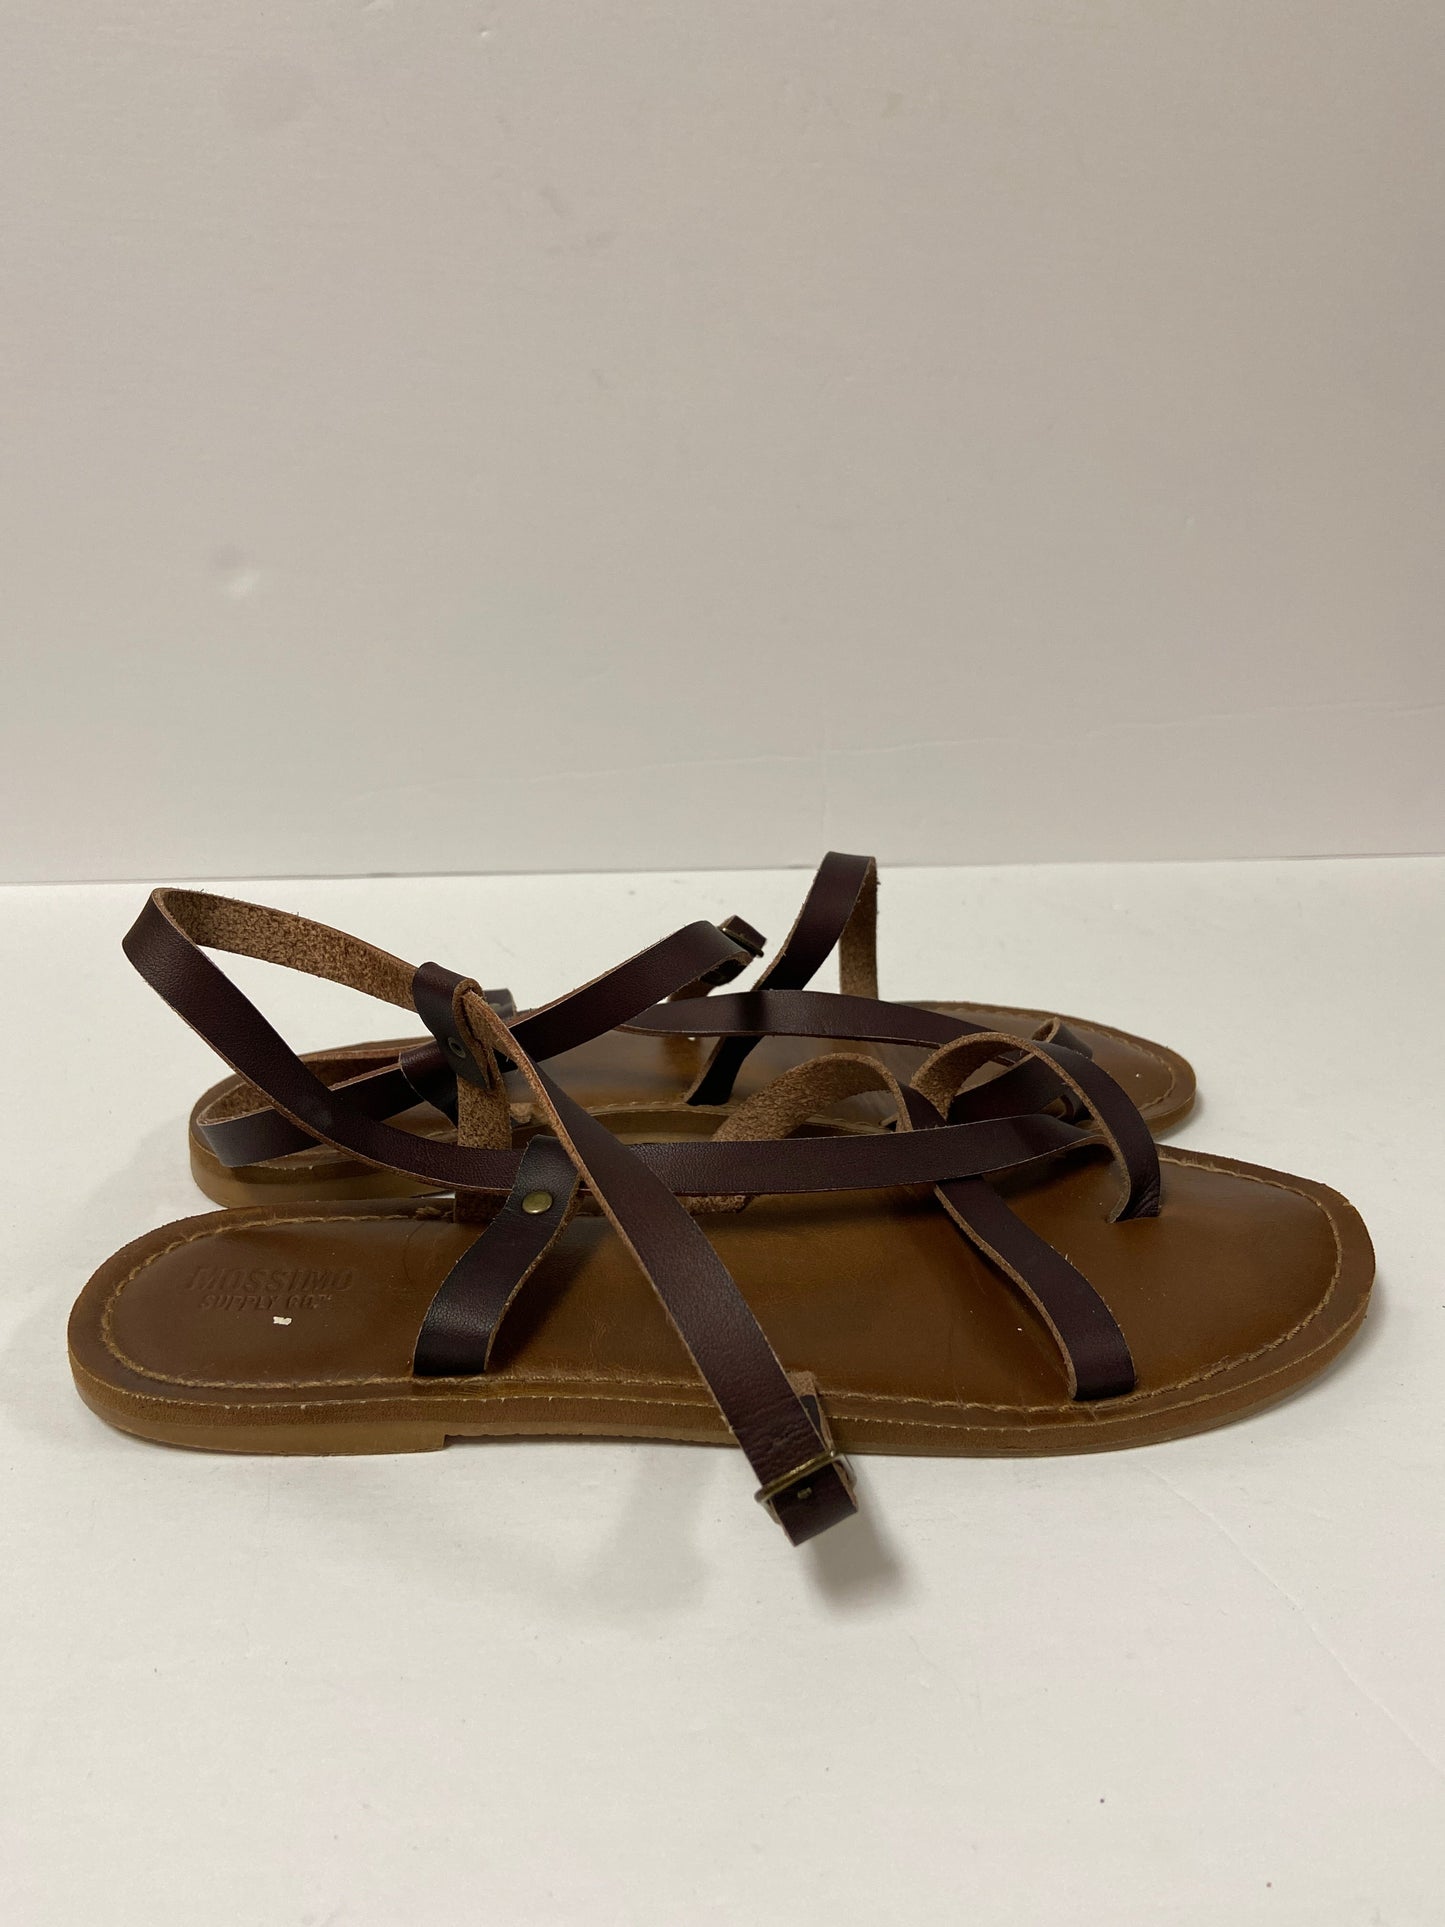 Sandals Flats By Mossimo  Size: 8